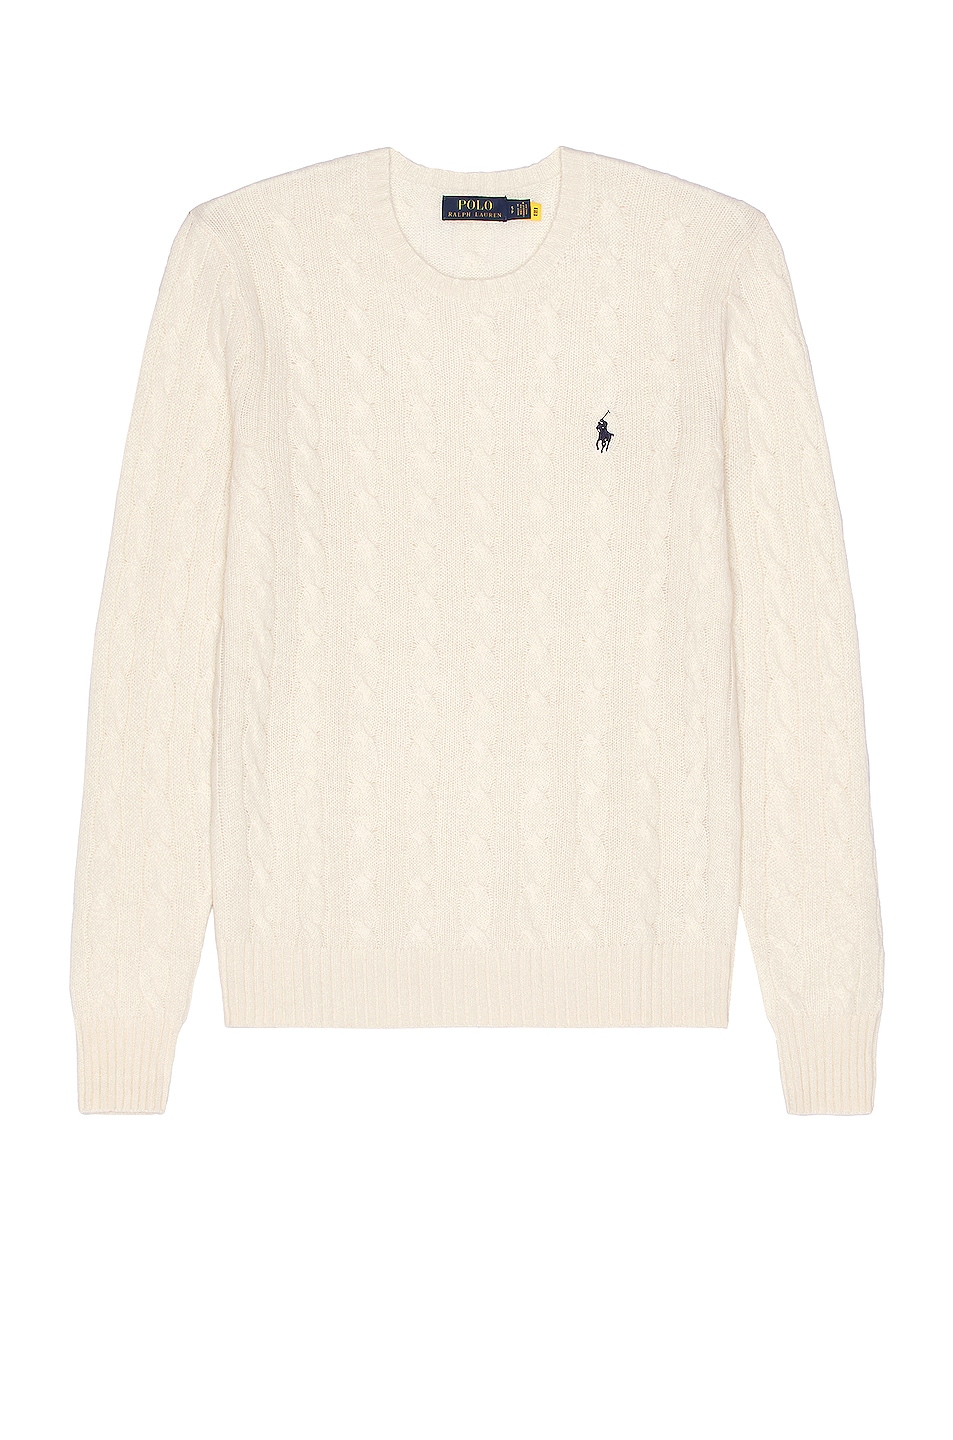 Image 1 of Polo Ralph Lauren Cable Sweater in Andover Cream